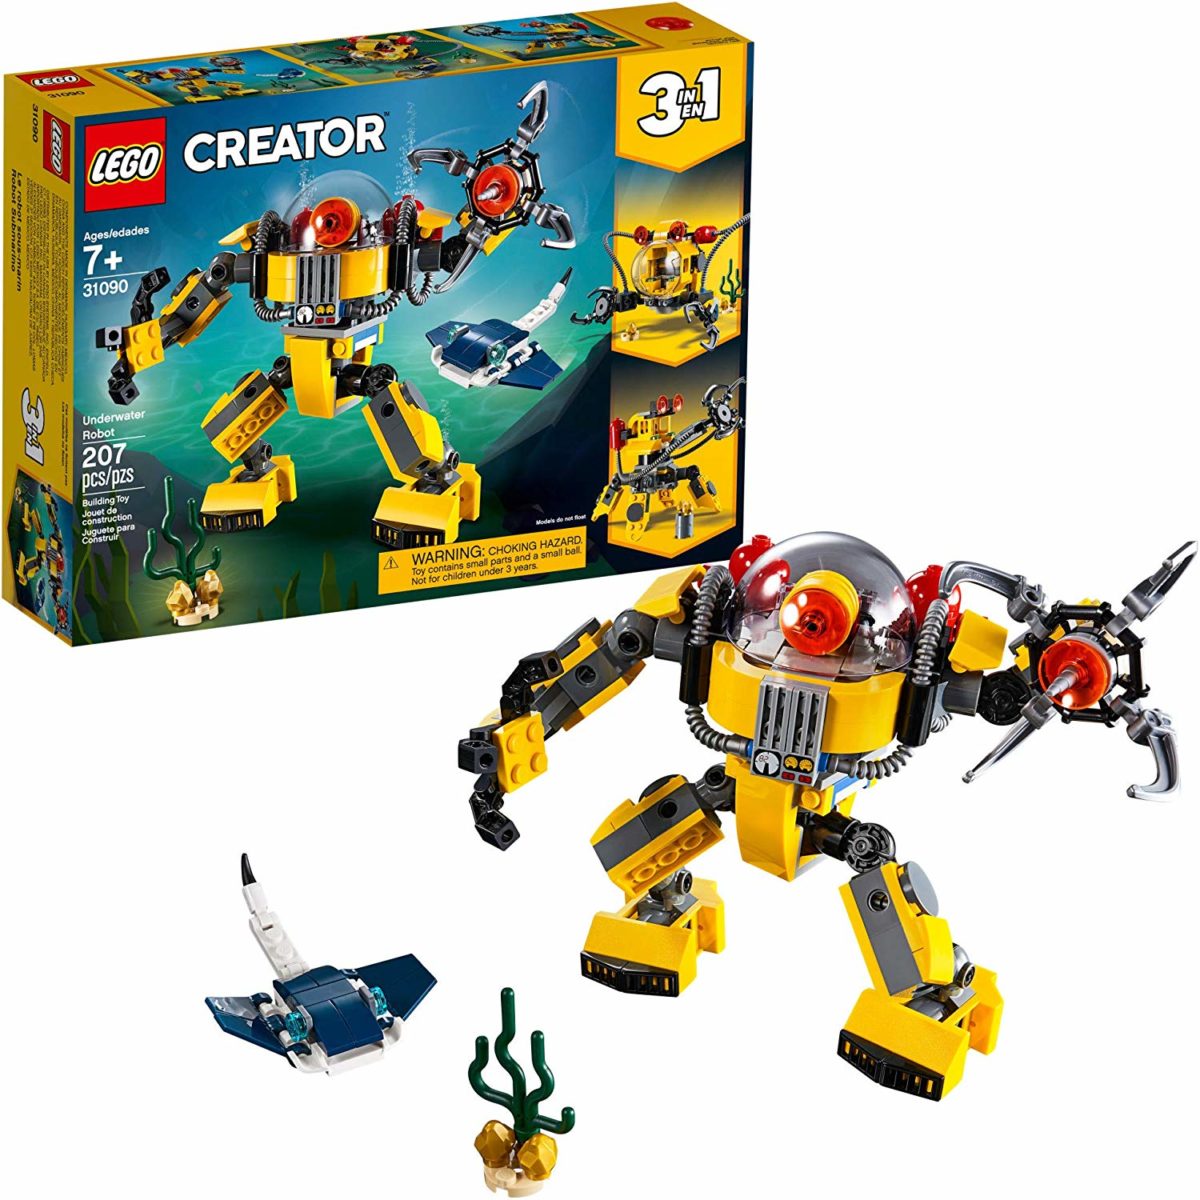 LEGO Creator 3in1 Underwater Robot - Top Toys and Gifts for Seven Year Old Boys 1